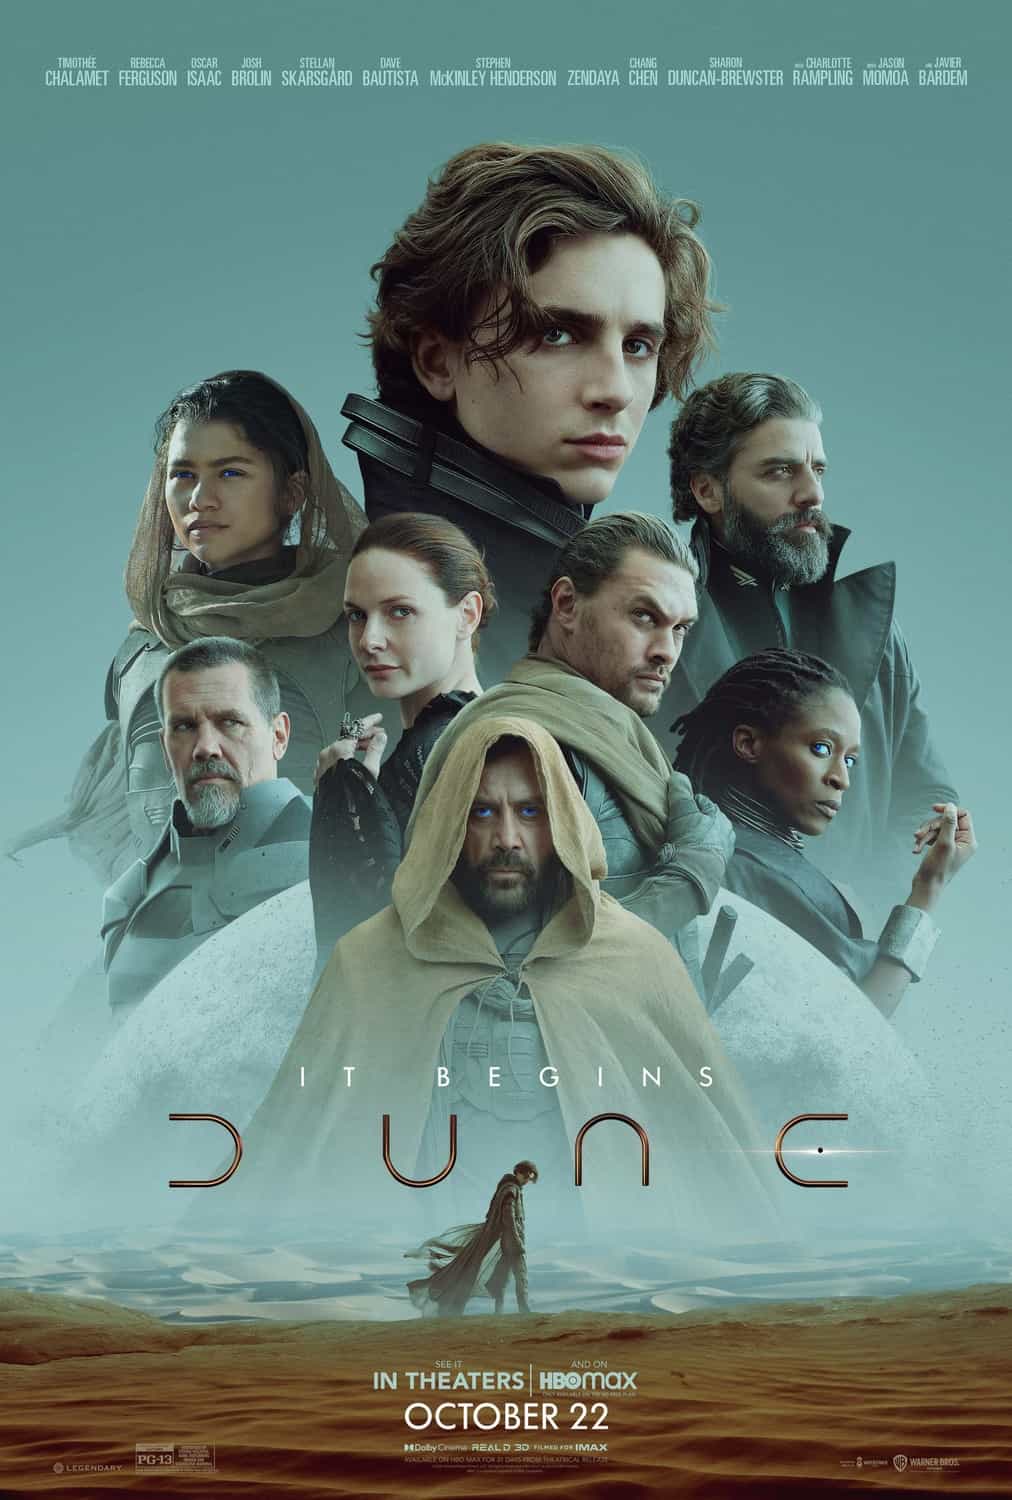 New poster released for Dune starring Timothee Chalamet  - movie release date 22nd October 2021